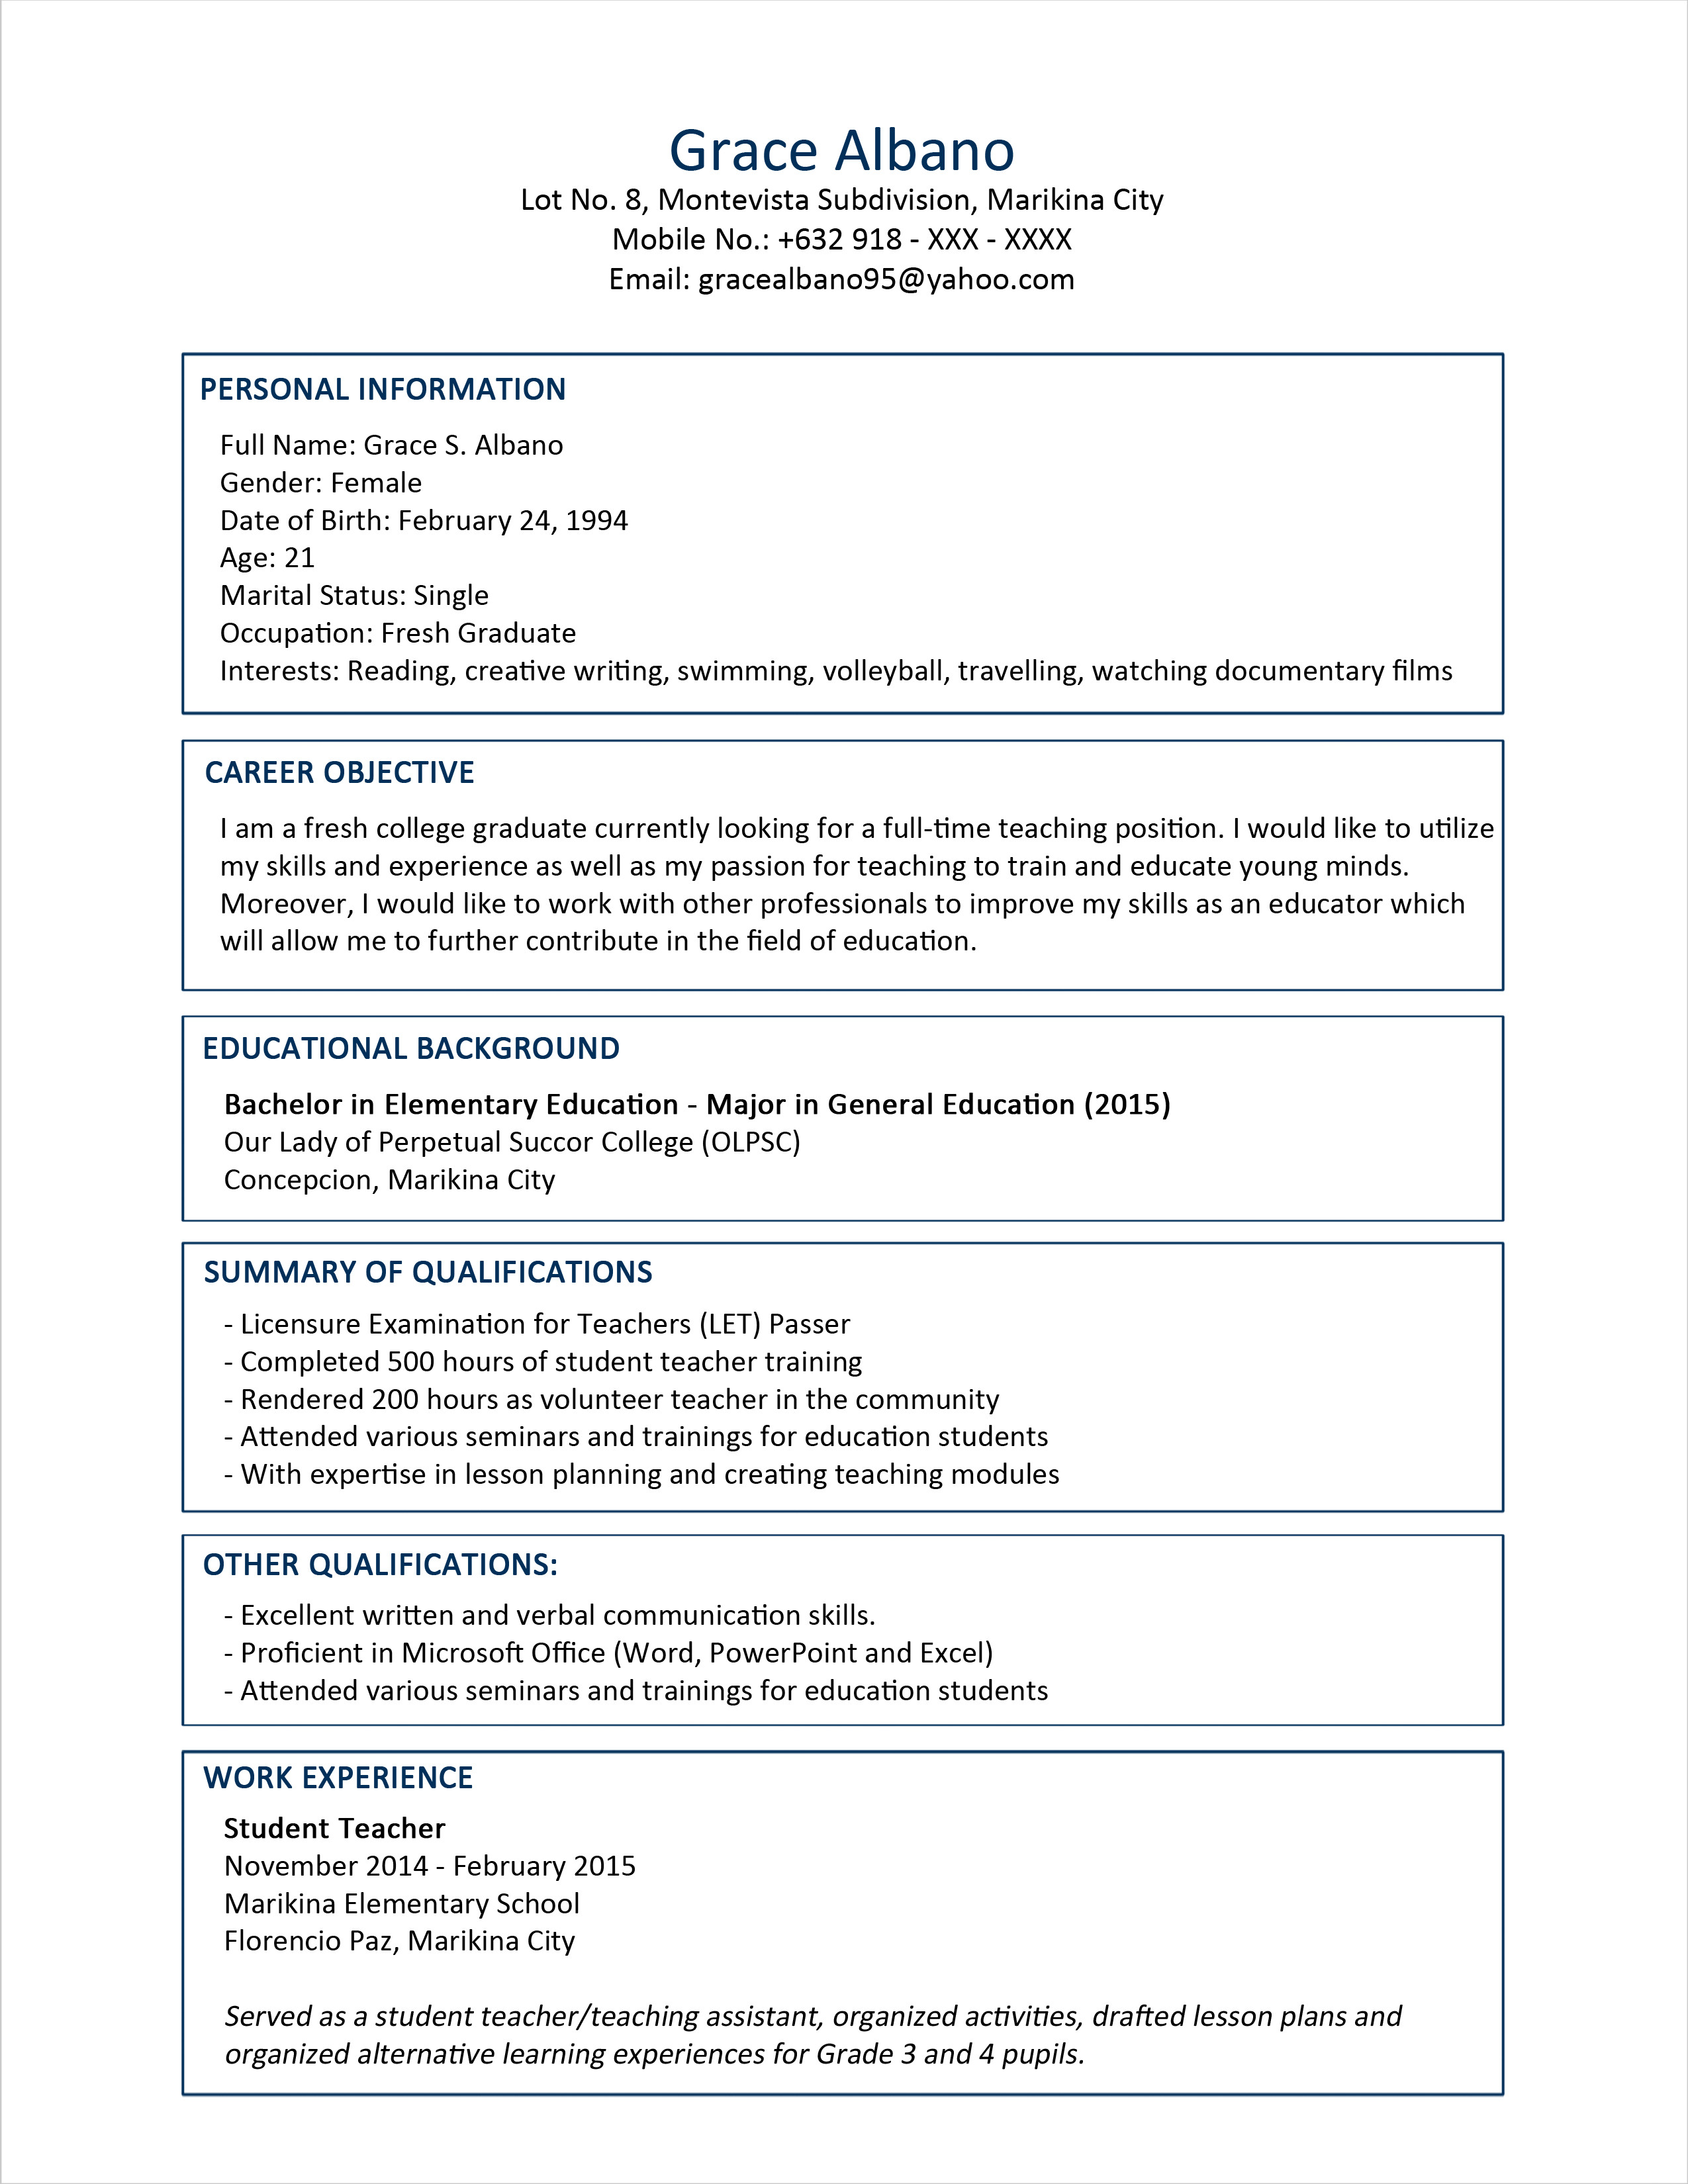 Resume Template for Pages Sample Resume format for Fresh Graduates Two Page format